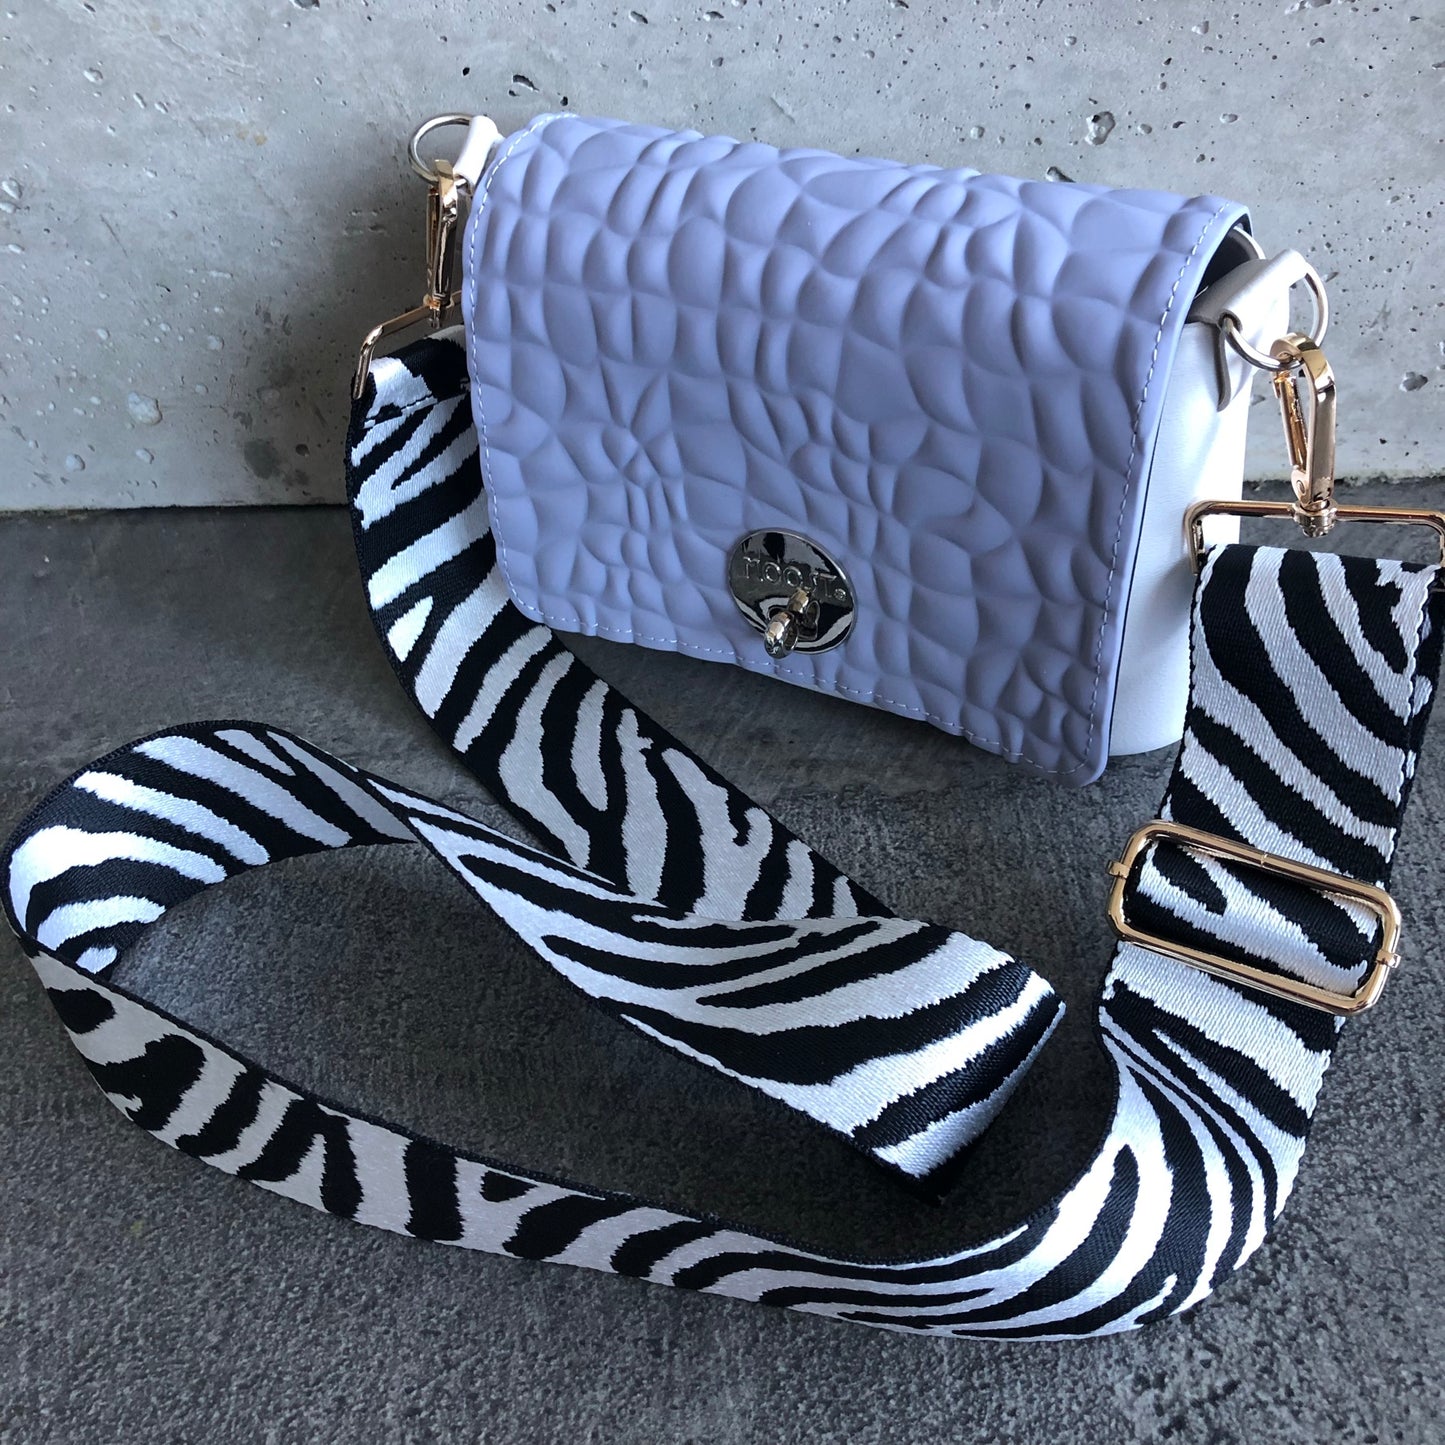 Periwinkle on Winter White with Zebra